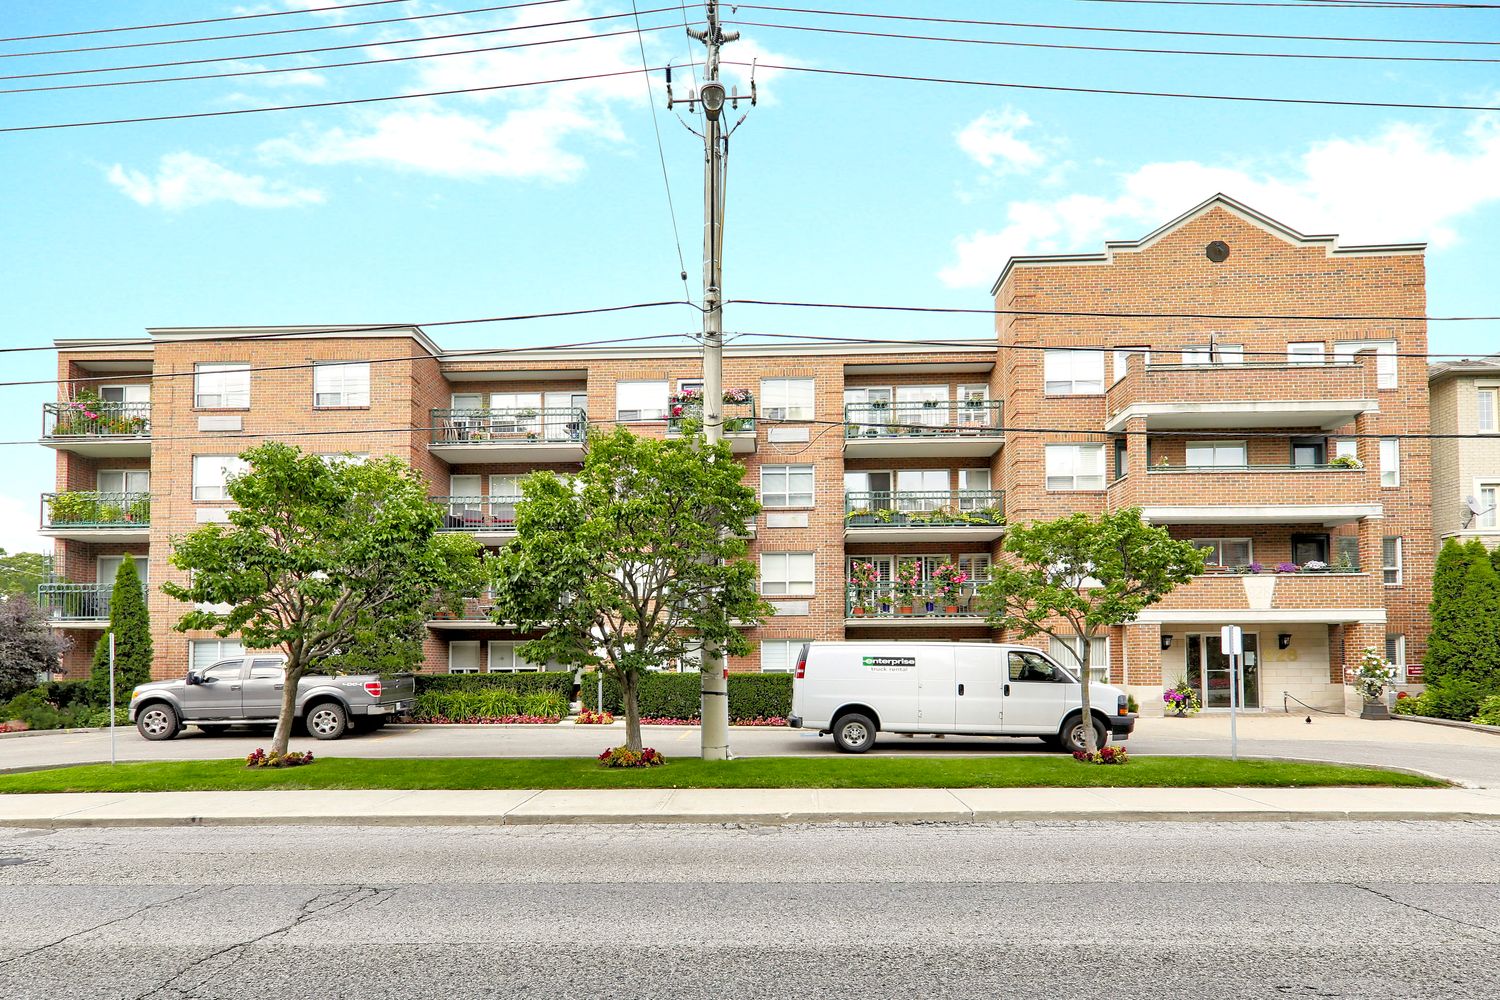 928 Millwood Road. 928 Millwood Rd is located in  East York, Toronto - image #2 of 4